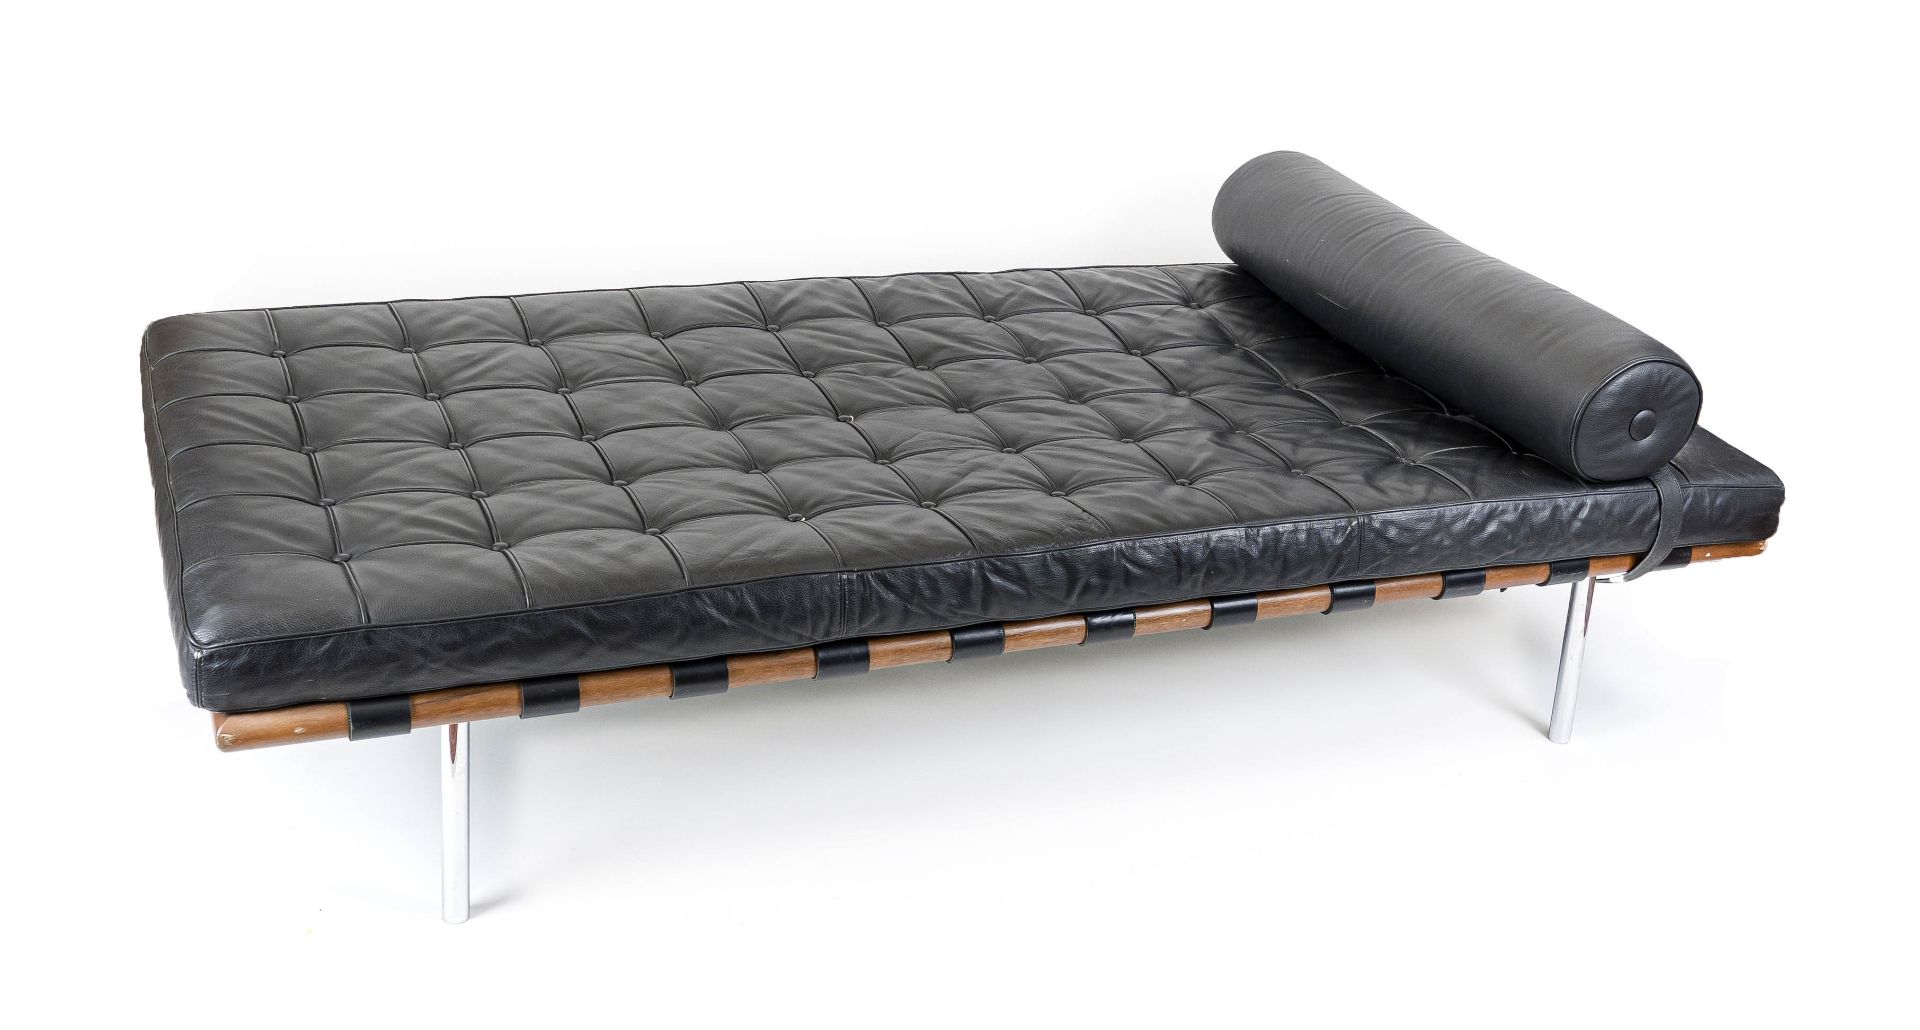 Barcelona daybed, 20th century, in the style of Mies van der Rohe, lacquered wooden frame with black